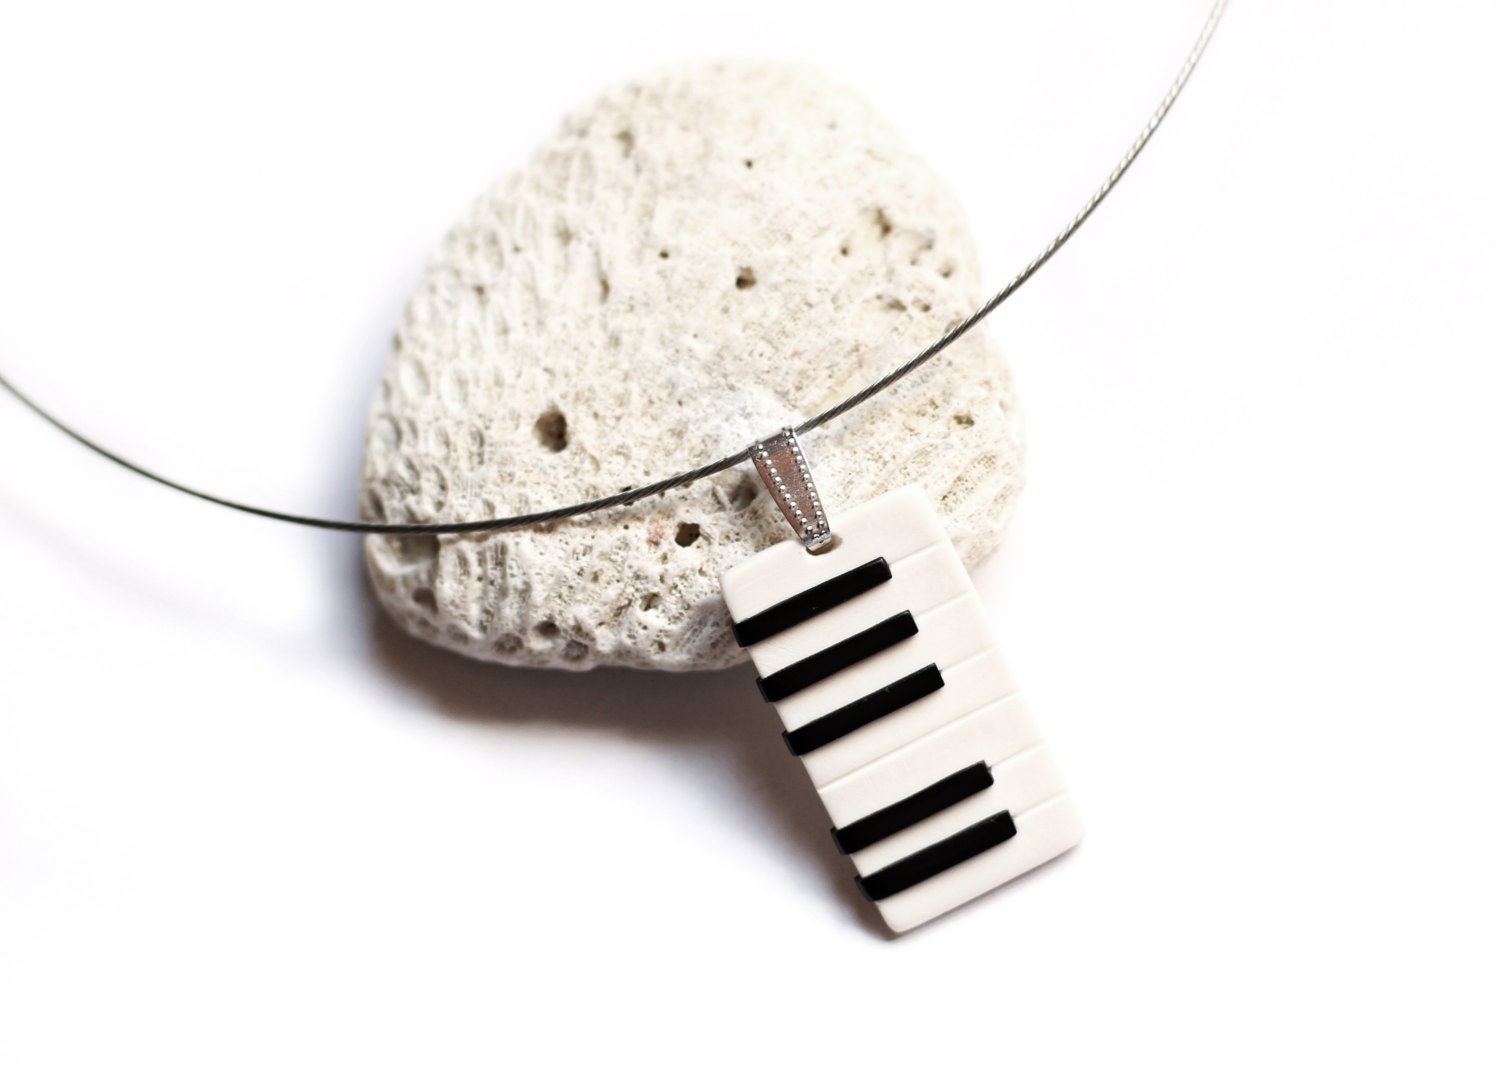 Keyboard Necklace/keyboard/necklace/music/instrument/musical 